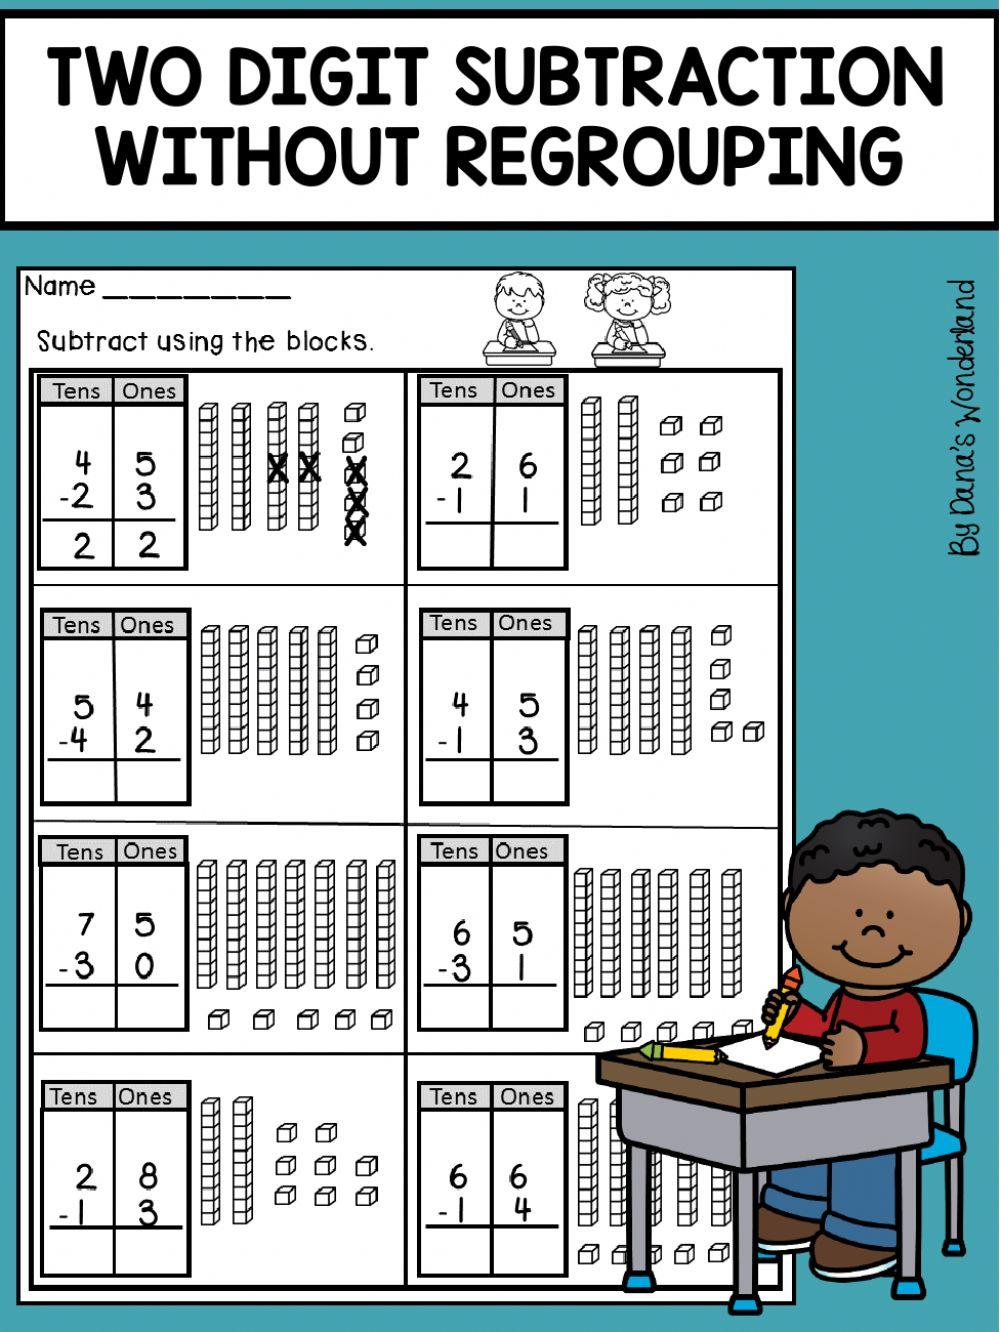 Subtractions without regrouping